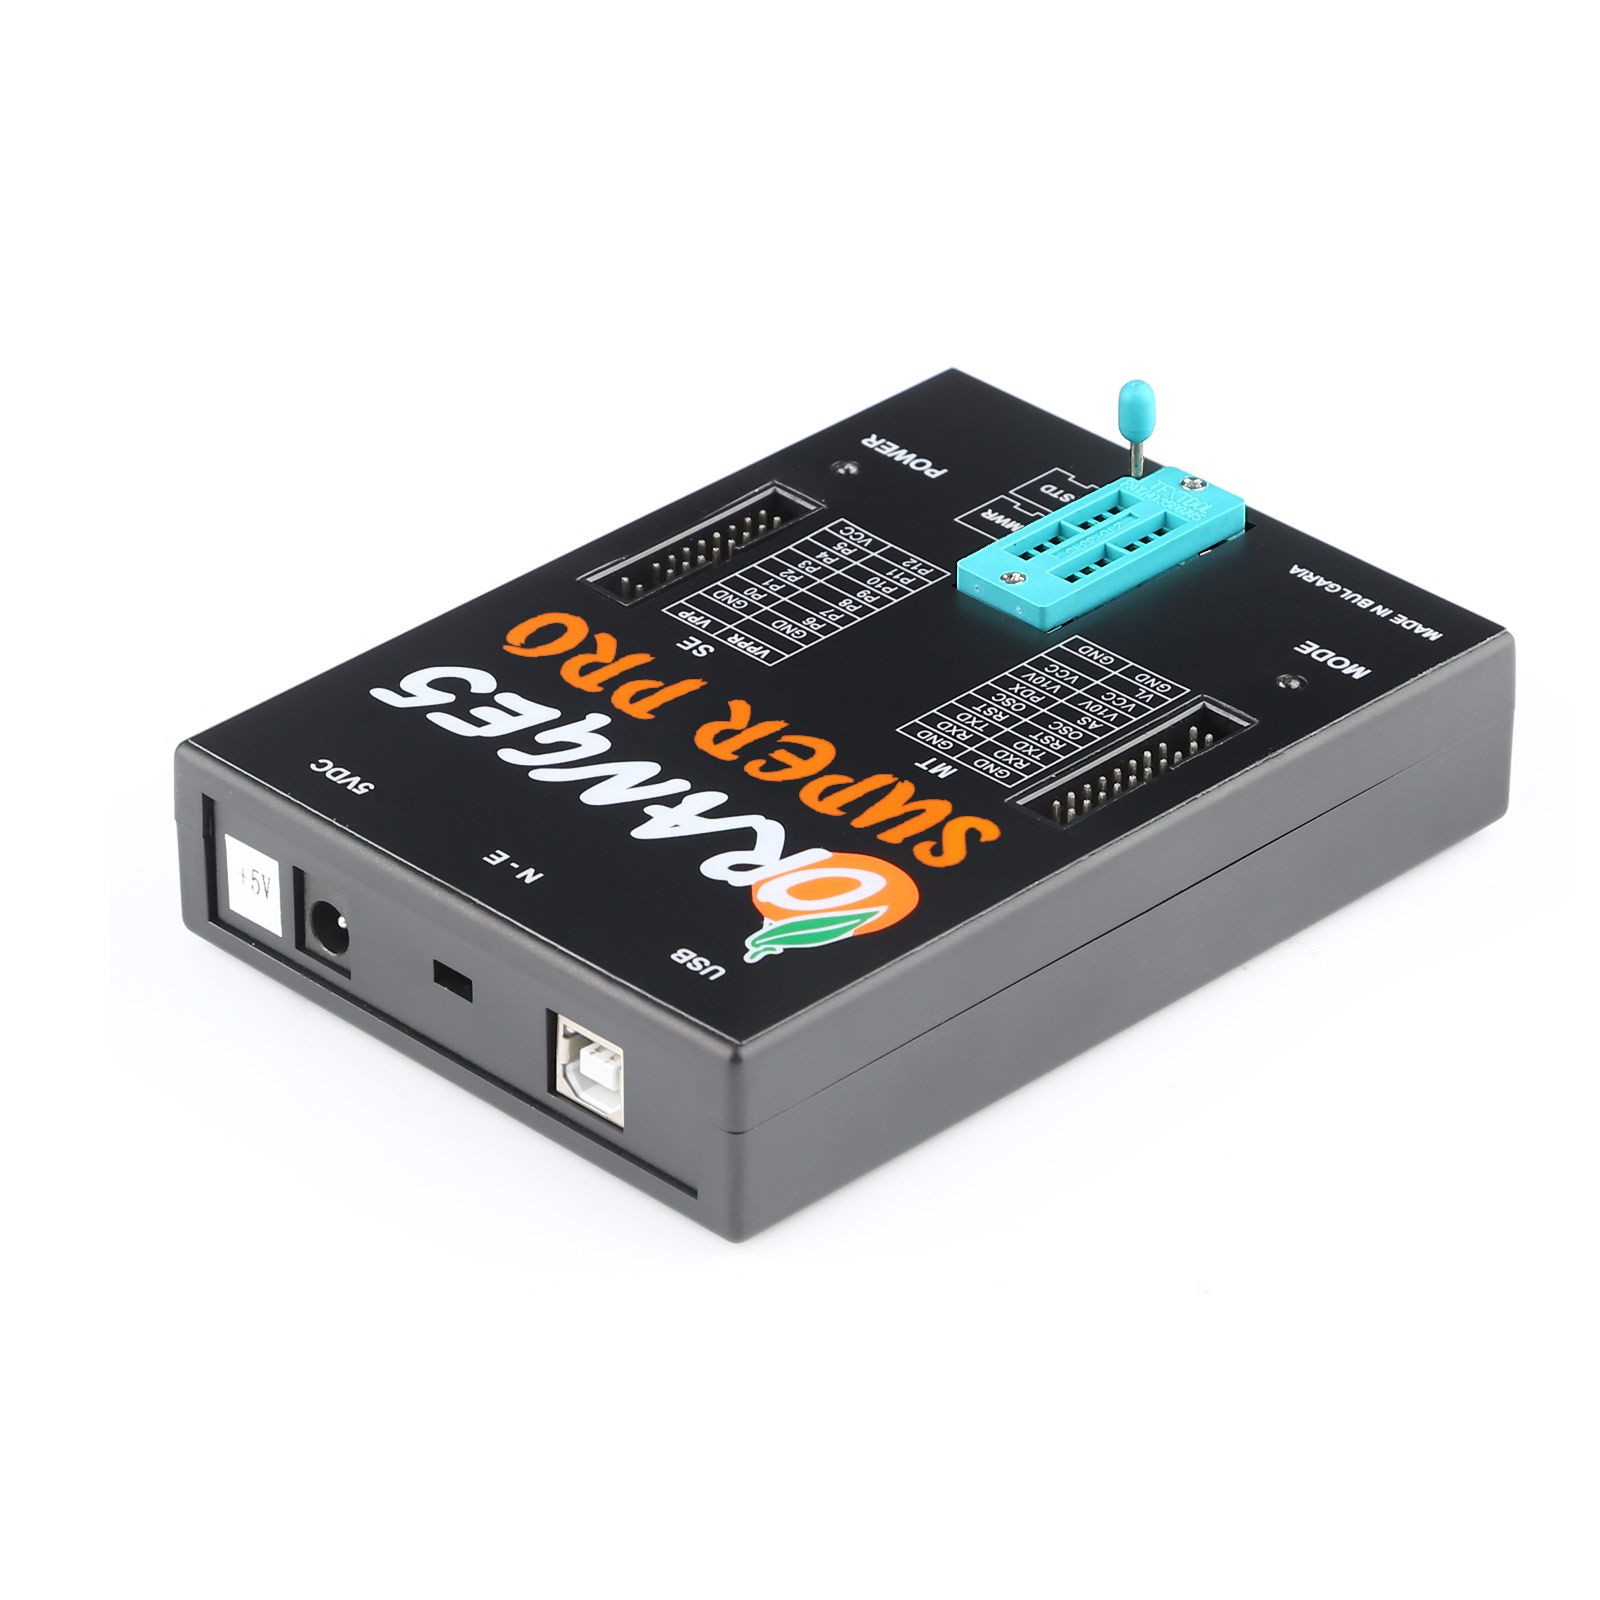 Orange5 Super Pro V1.38 Programming Tool With Full Adapter not Need USB Dongle for Airbag Dash Modules Fully Activated